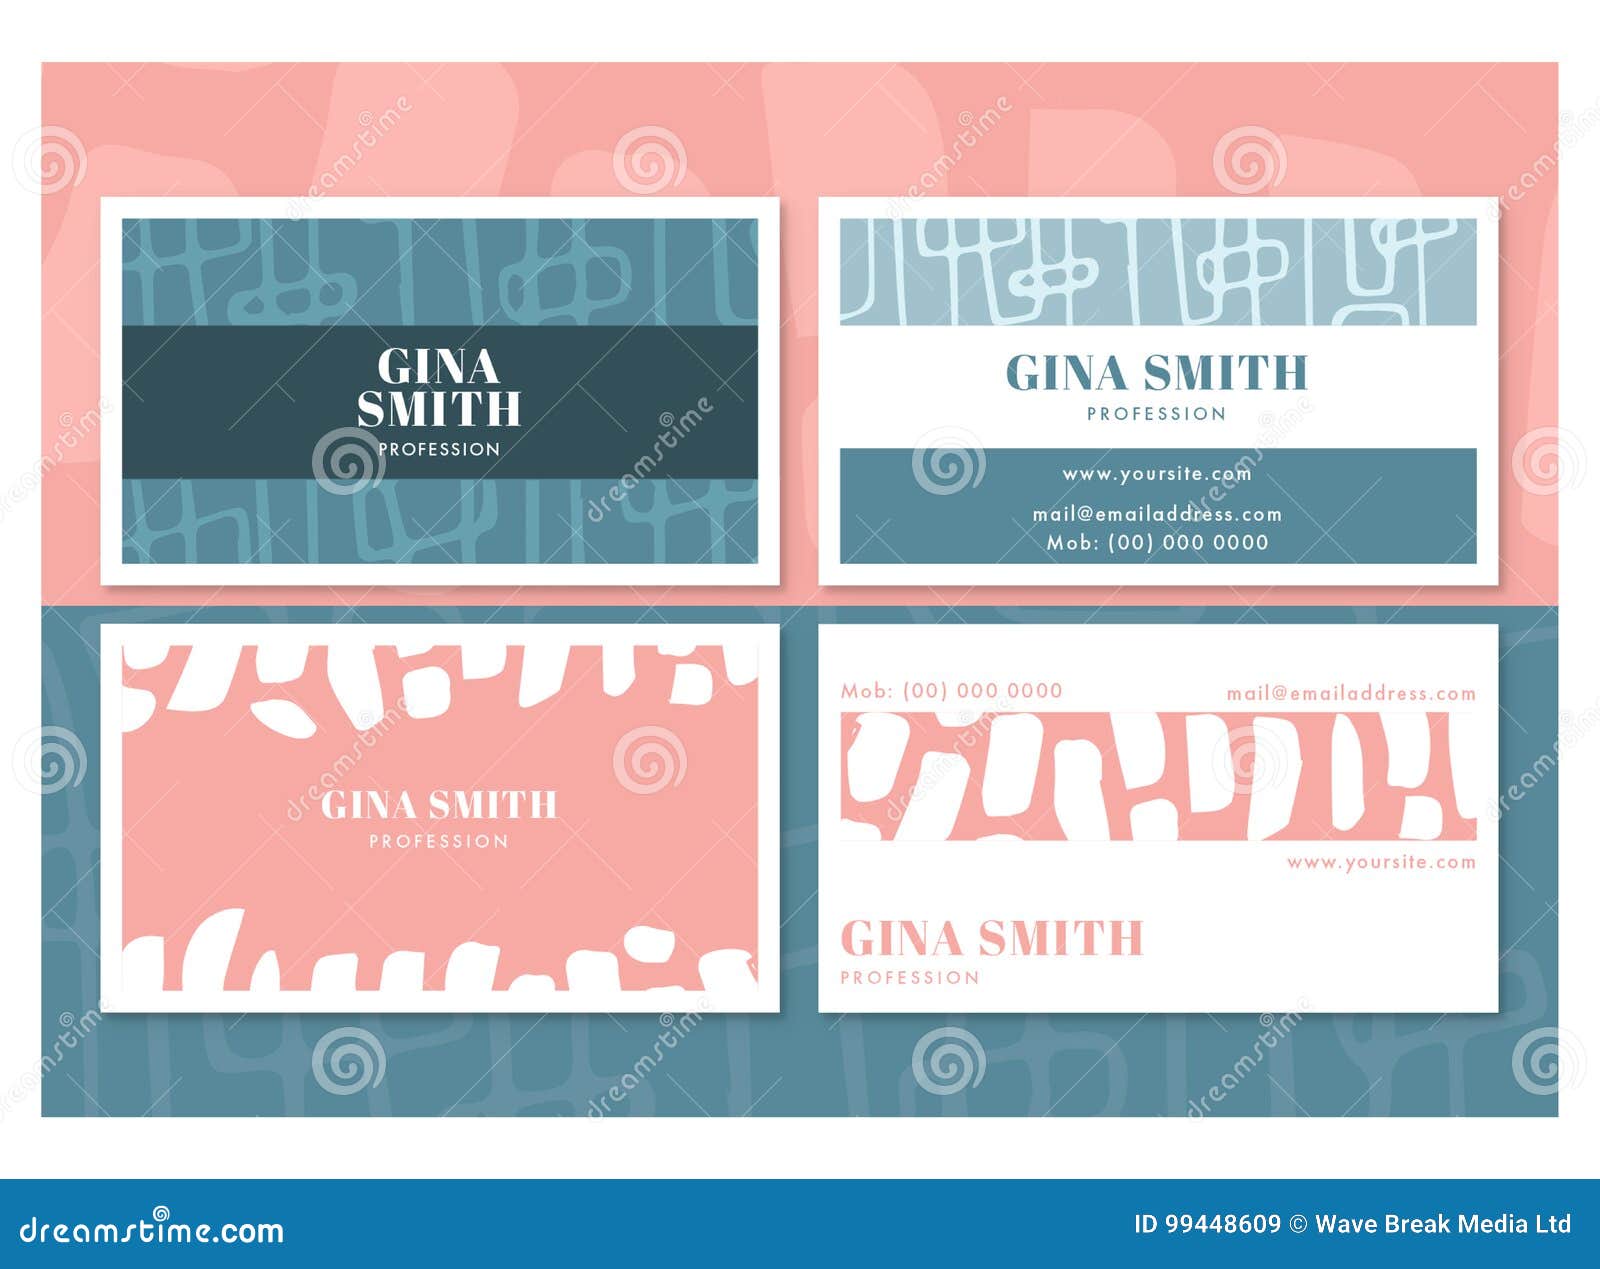  set of business card with gina smith text